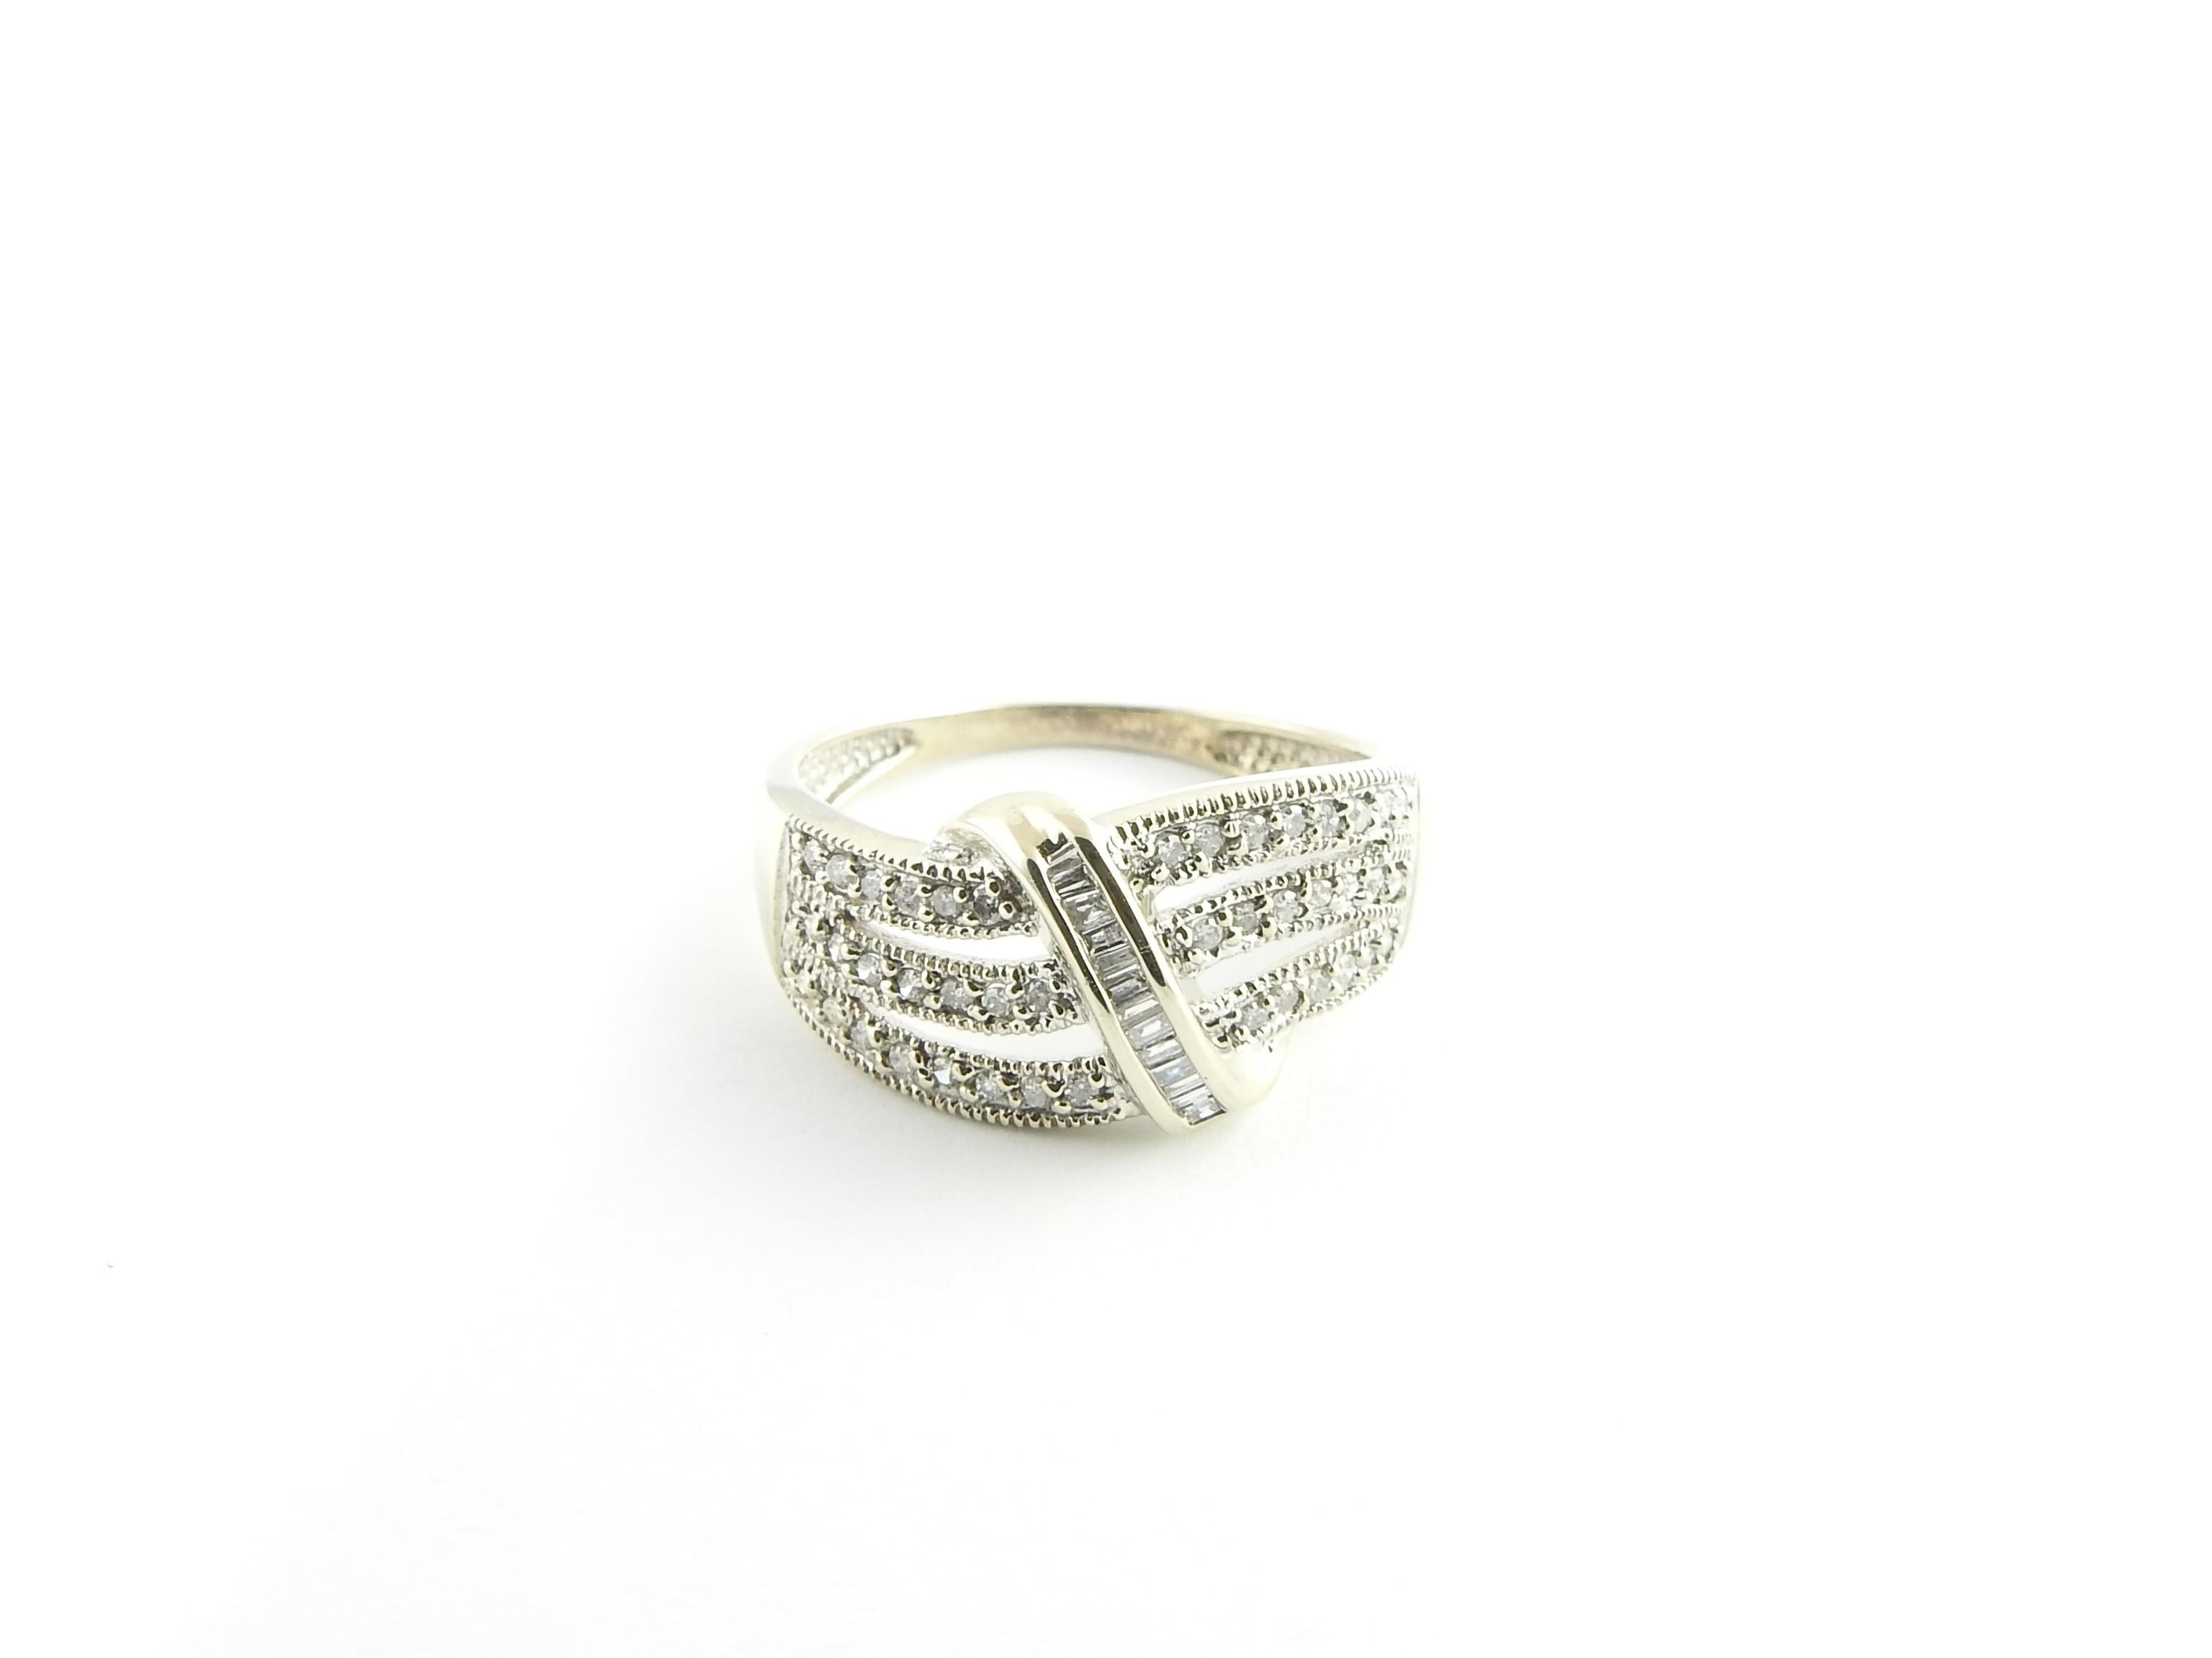 Vintage 14 Karat White Gold and Diamond Ring Size 7.25

This sparkling ring features 42 round single cut diamonds and 13 baguette diamonds set in classic 14K white gold. Width: 11 mm. Shank: 1.5 mm.

Approximate total diamond weight: .47